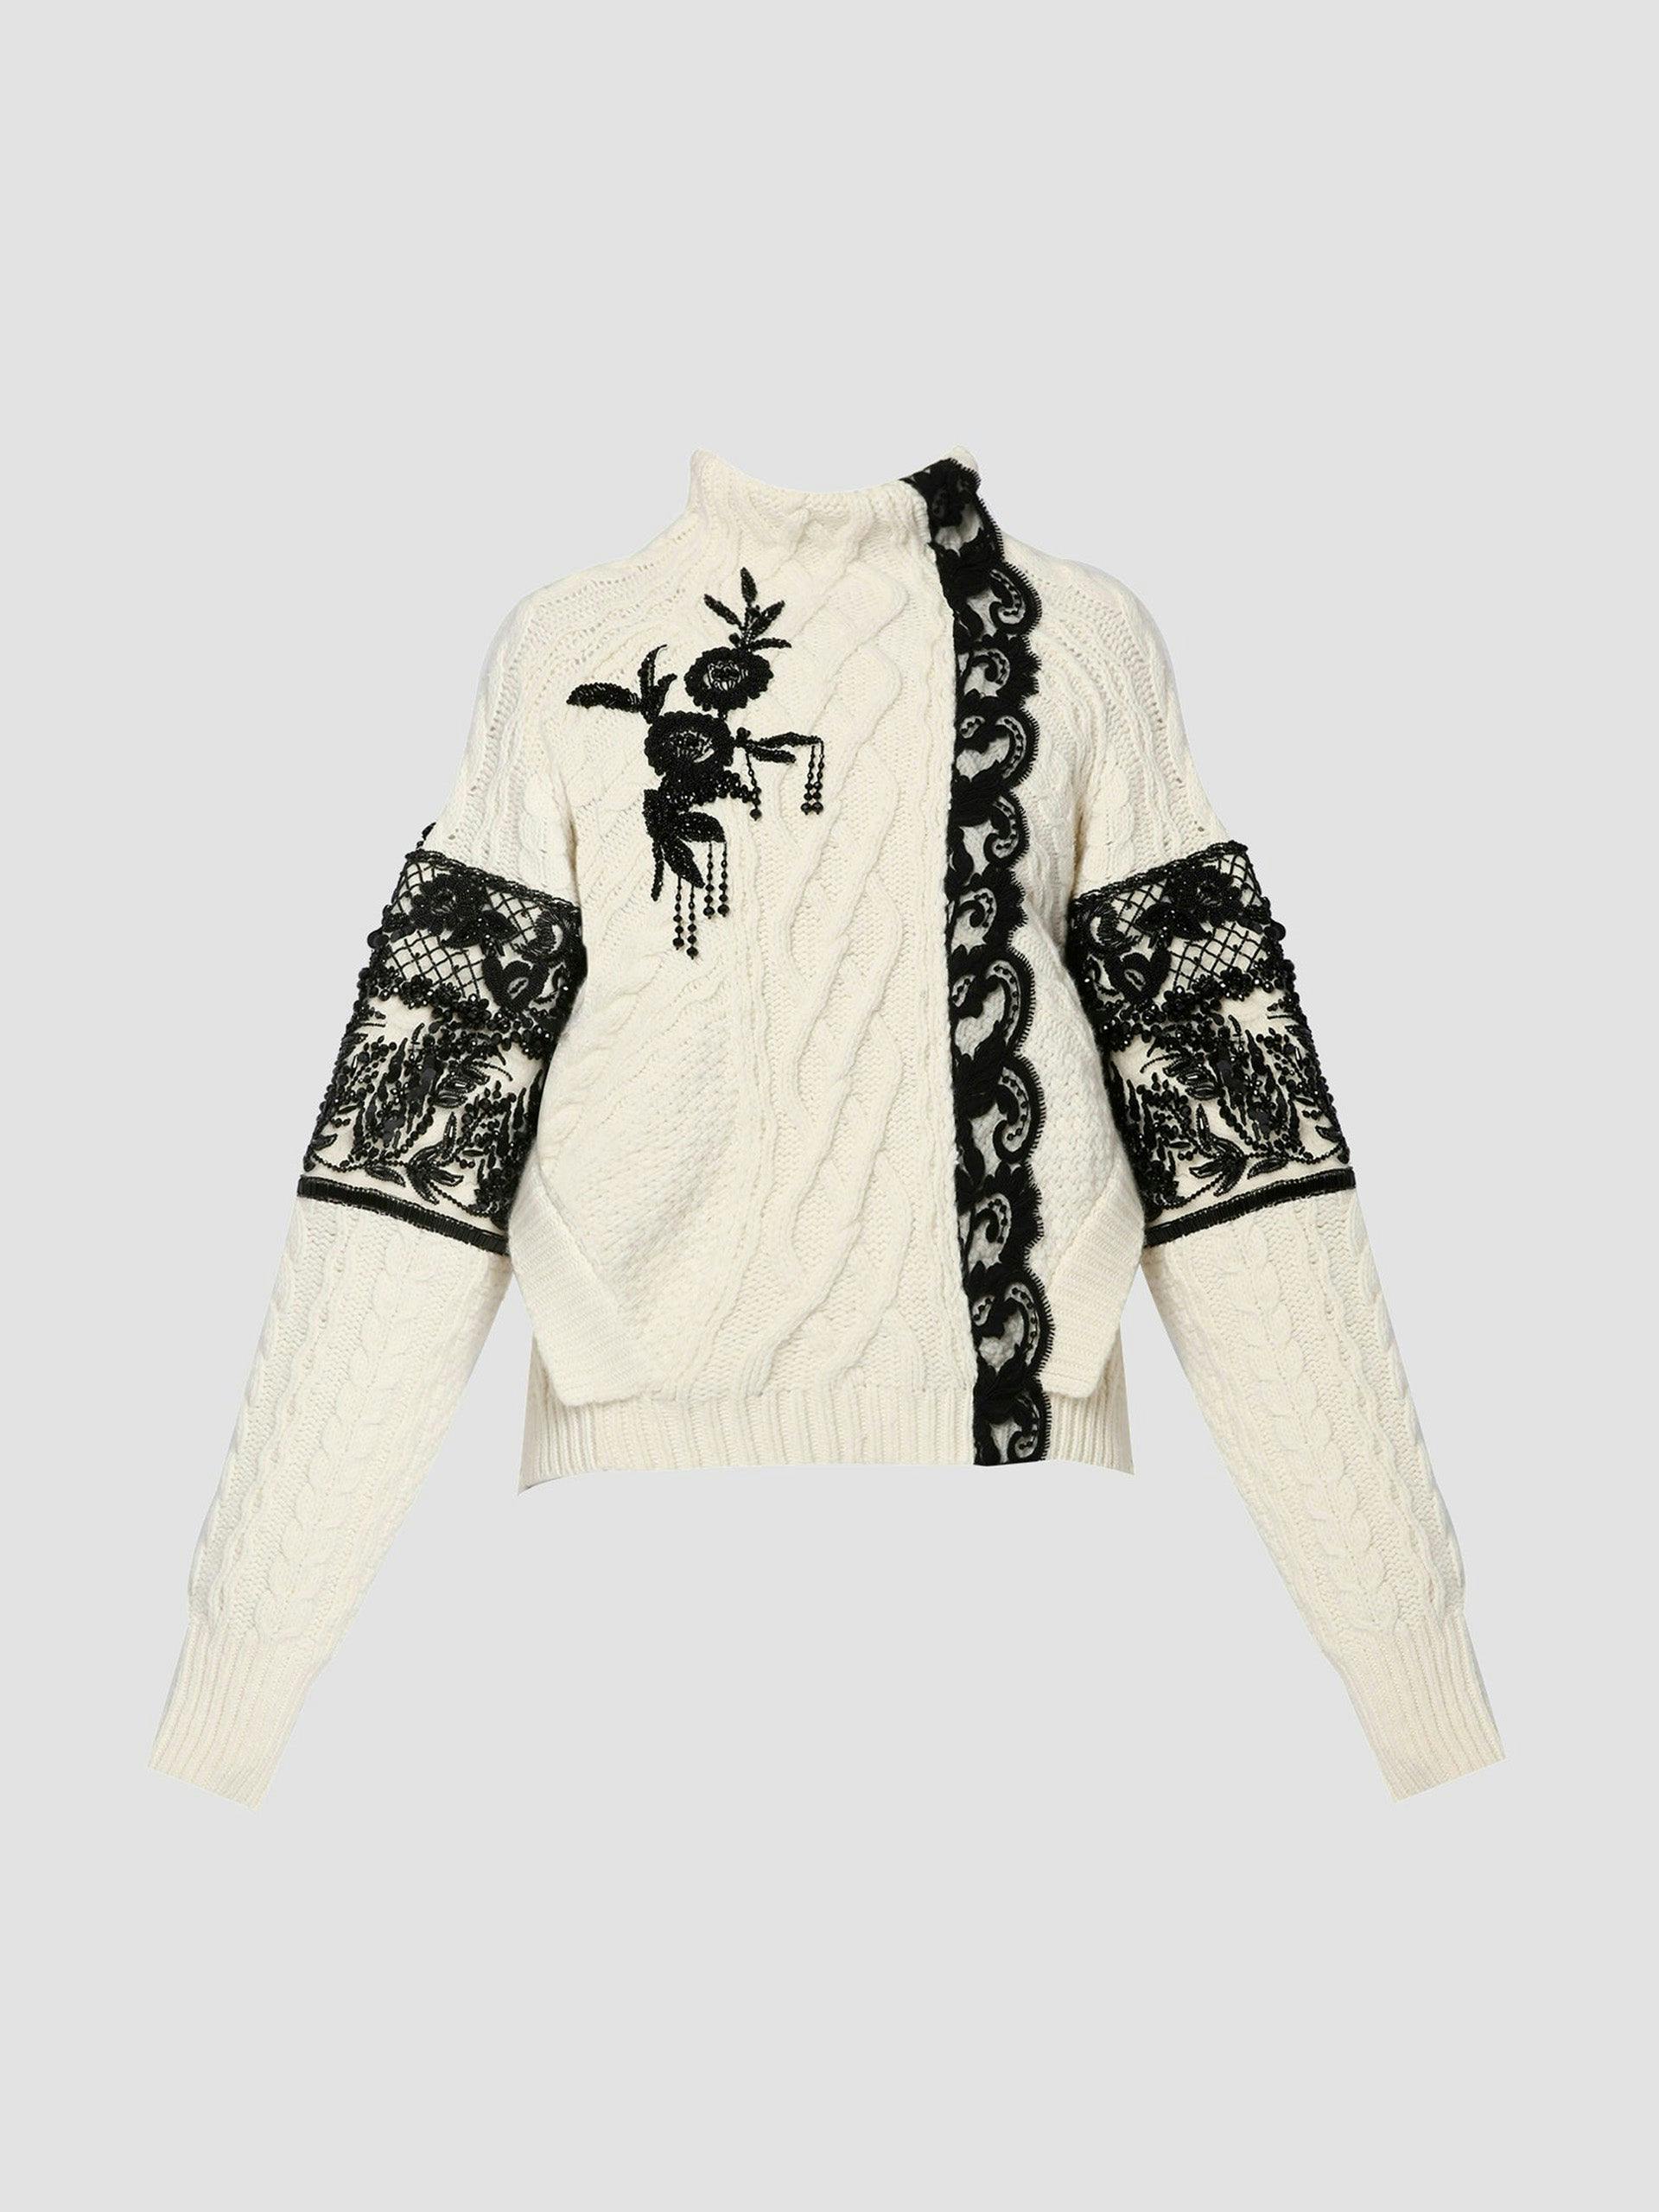 Hand-embellished, asymmetrical cable knit jumper